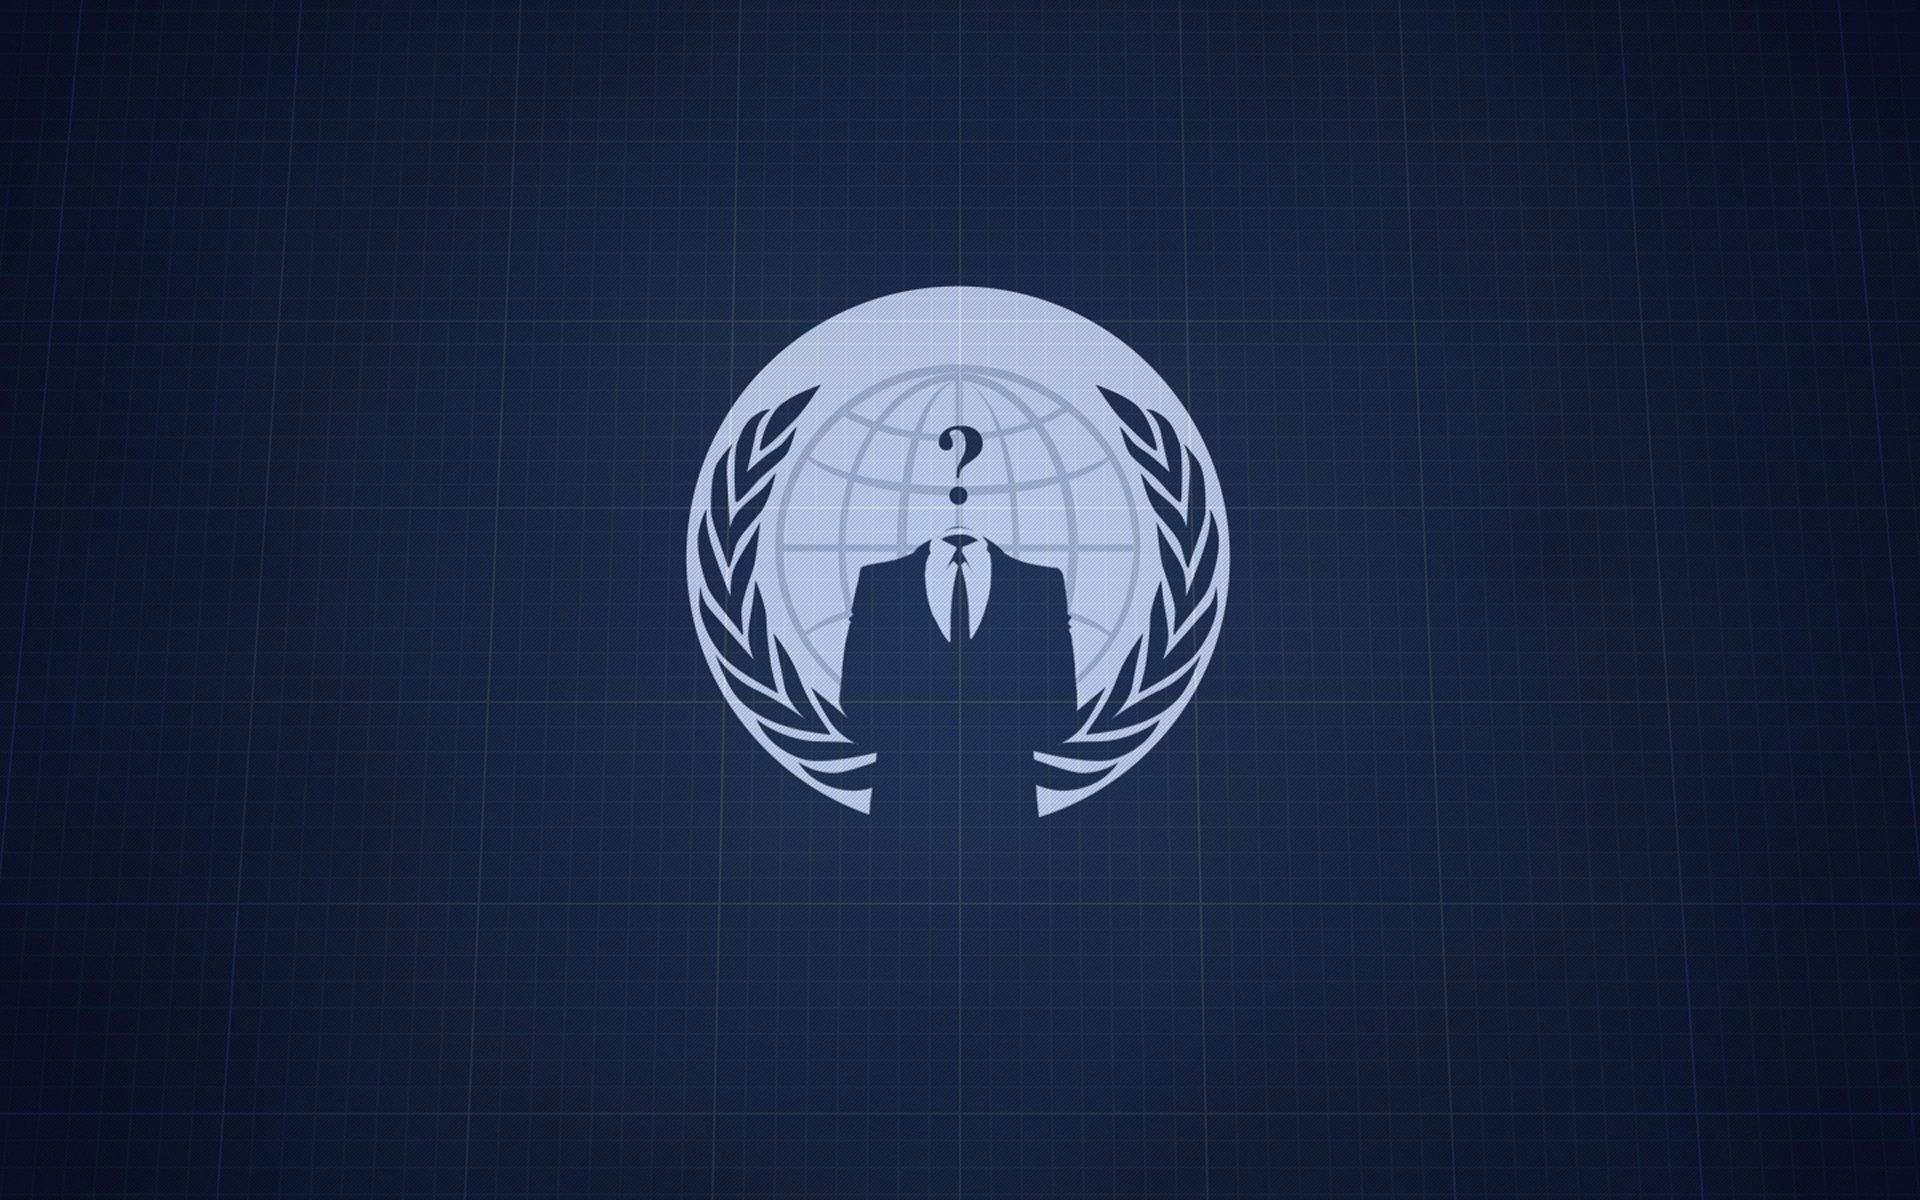  anonymous hackers clan logo enjoy this anonymous wallpaper in high 1920x1200